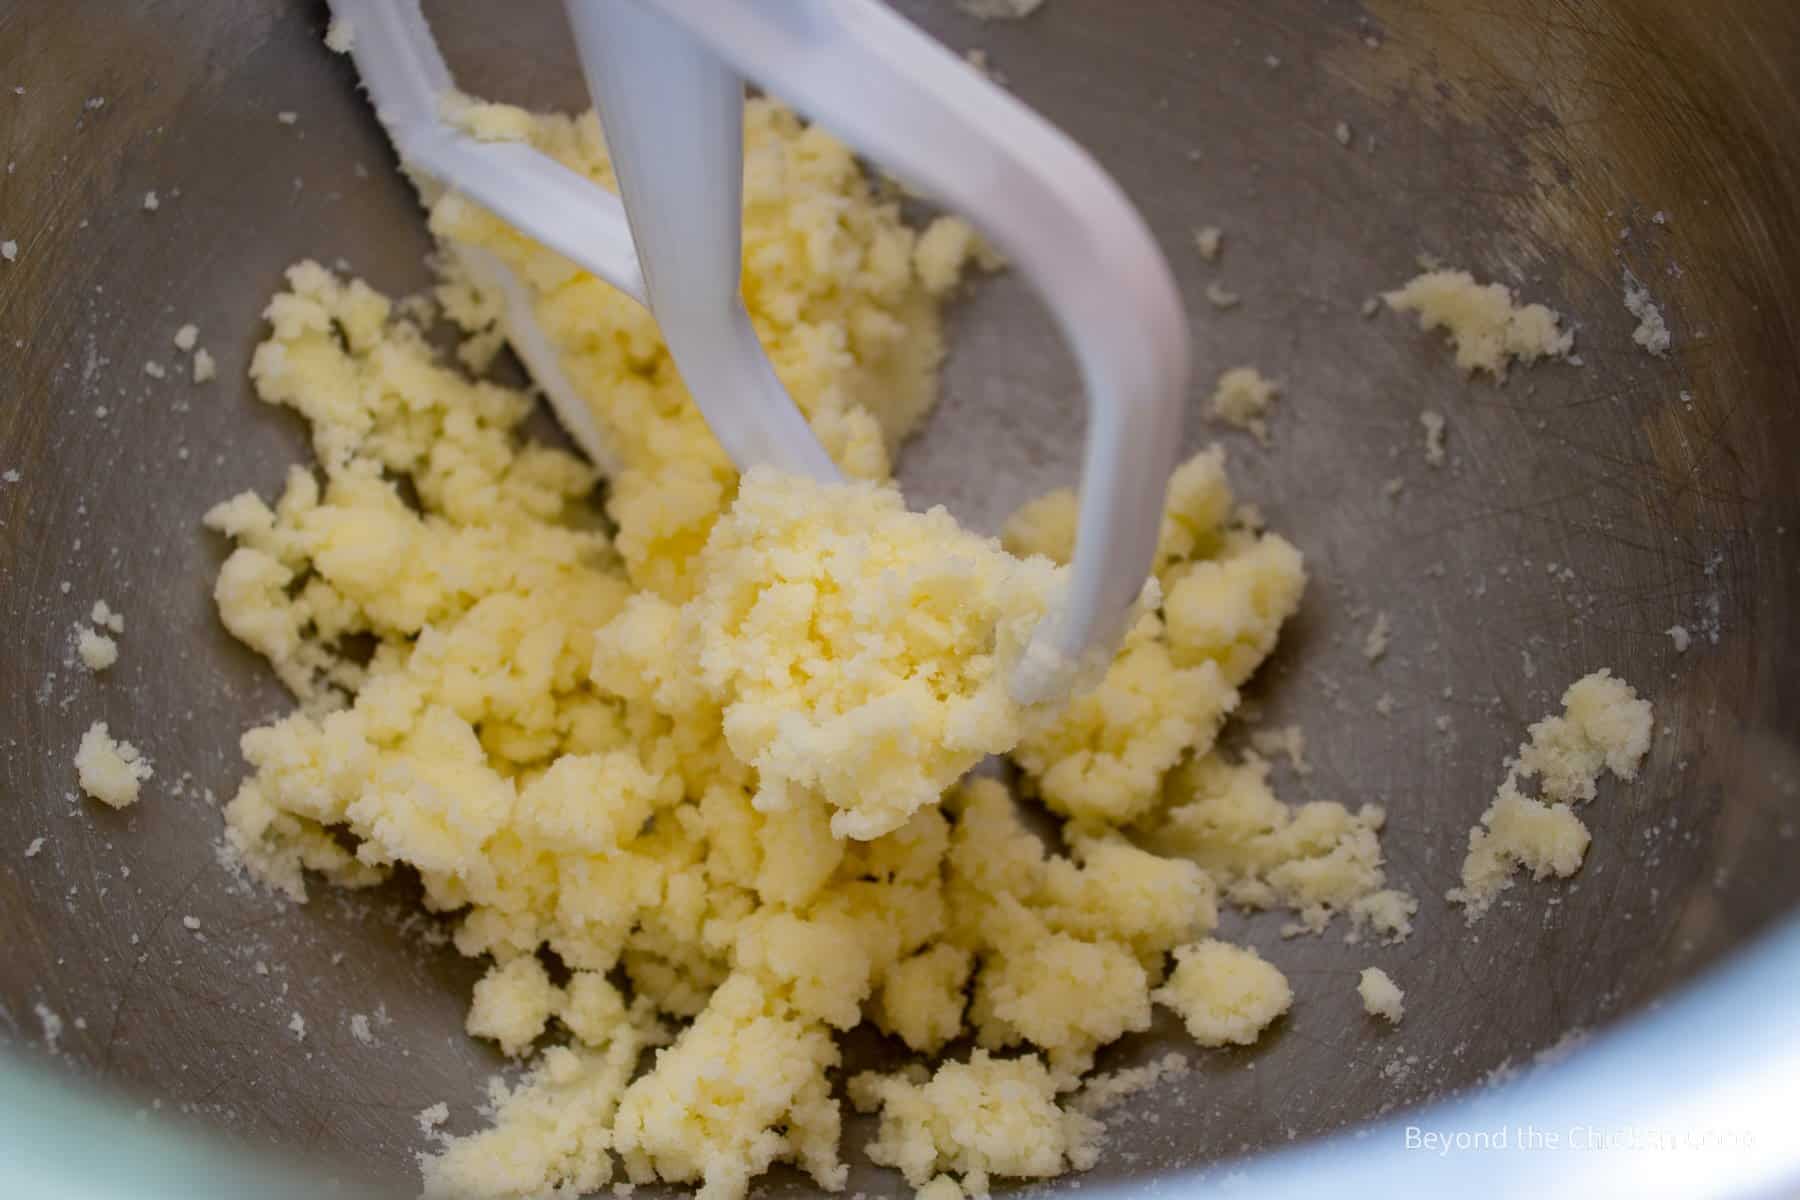 Butter and sugar in a mixing bowl.